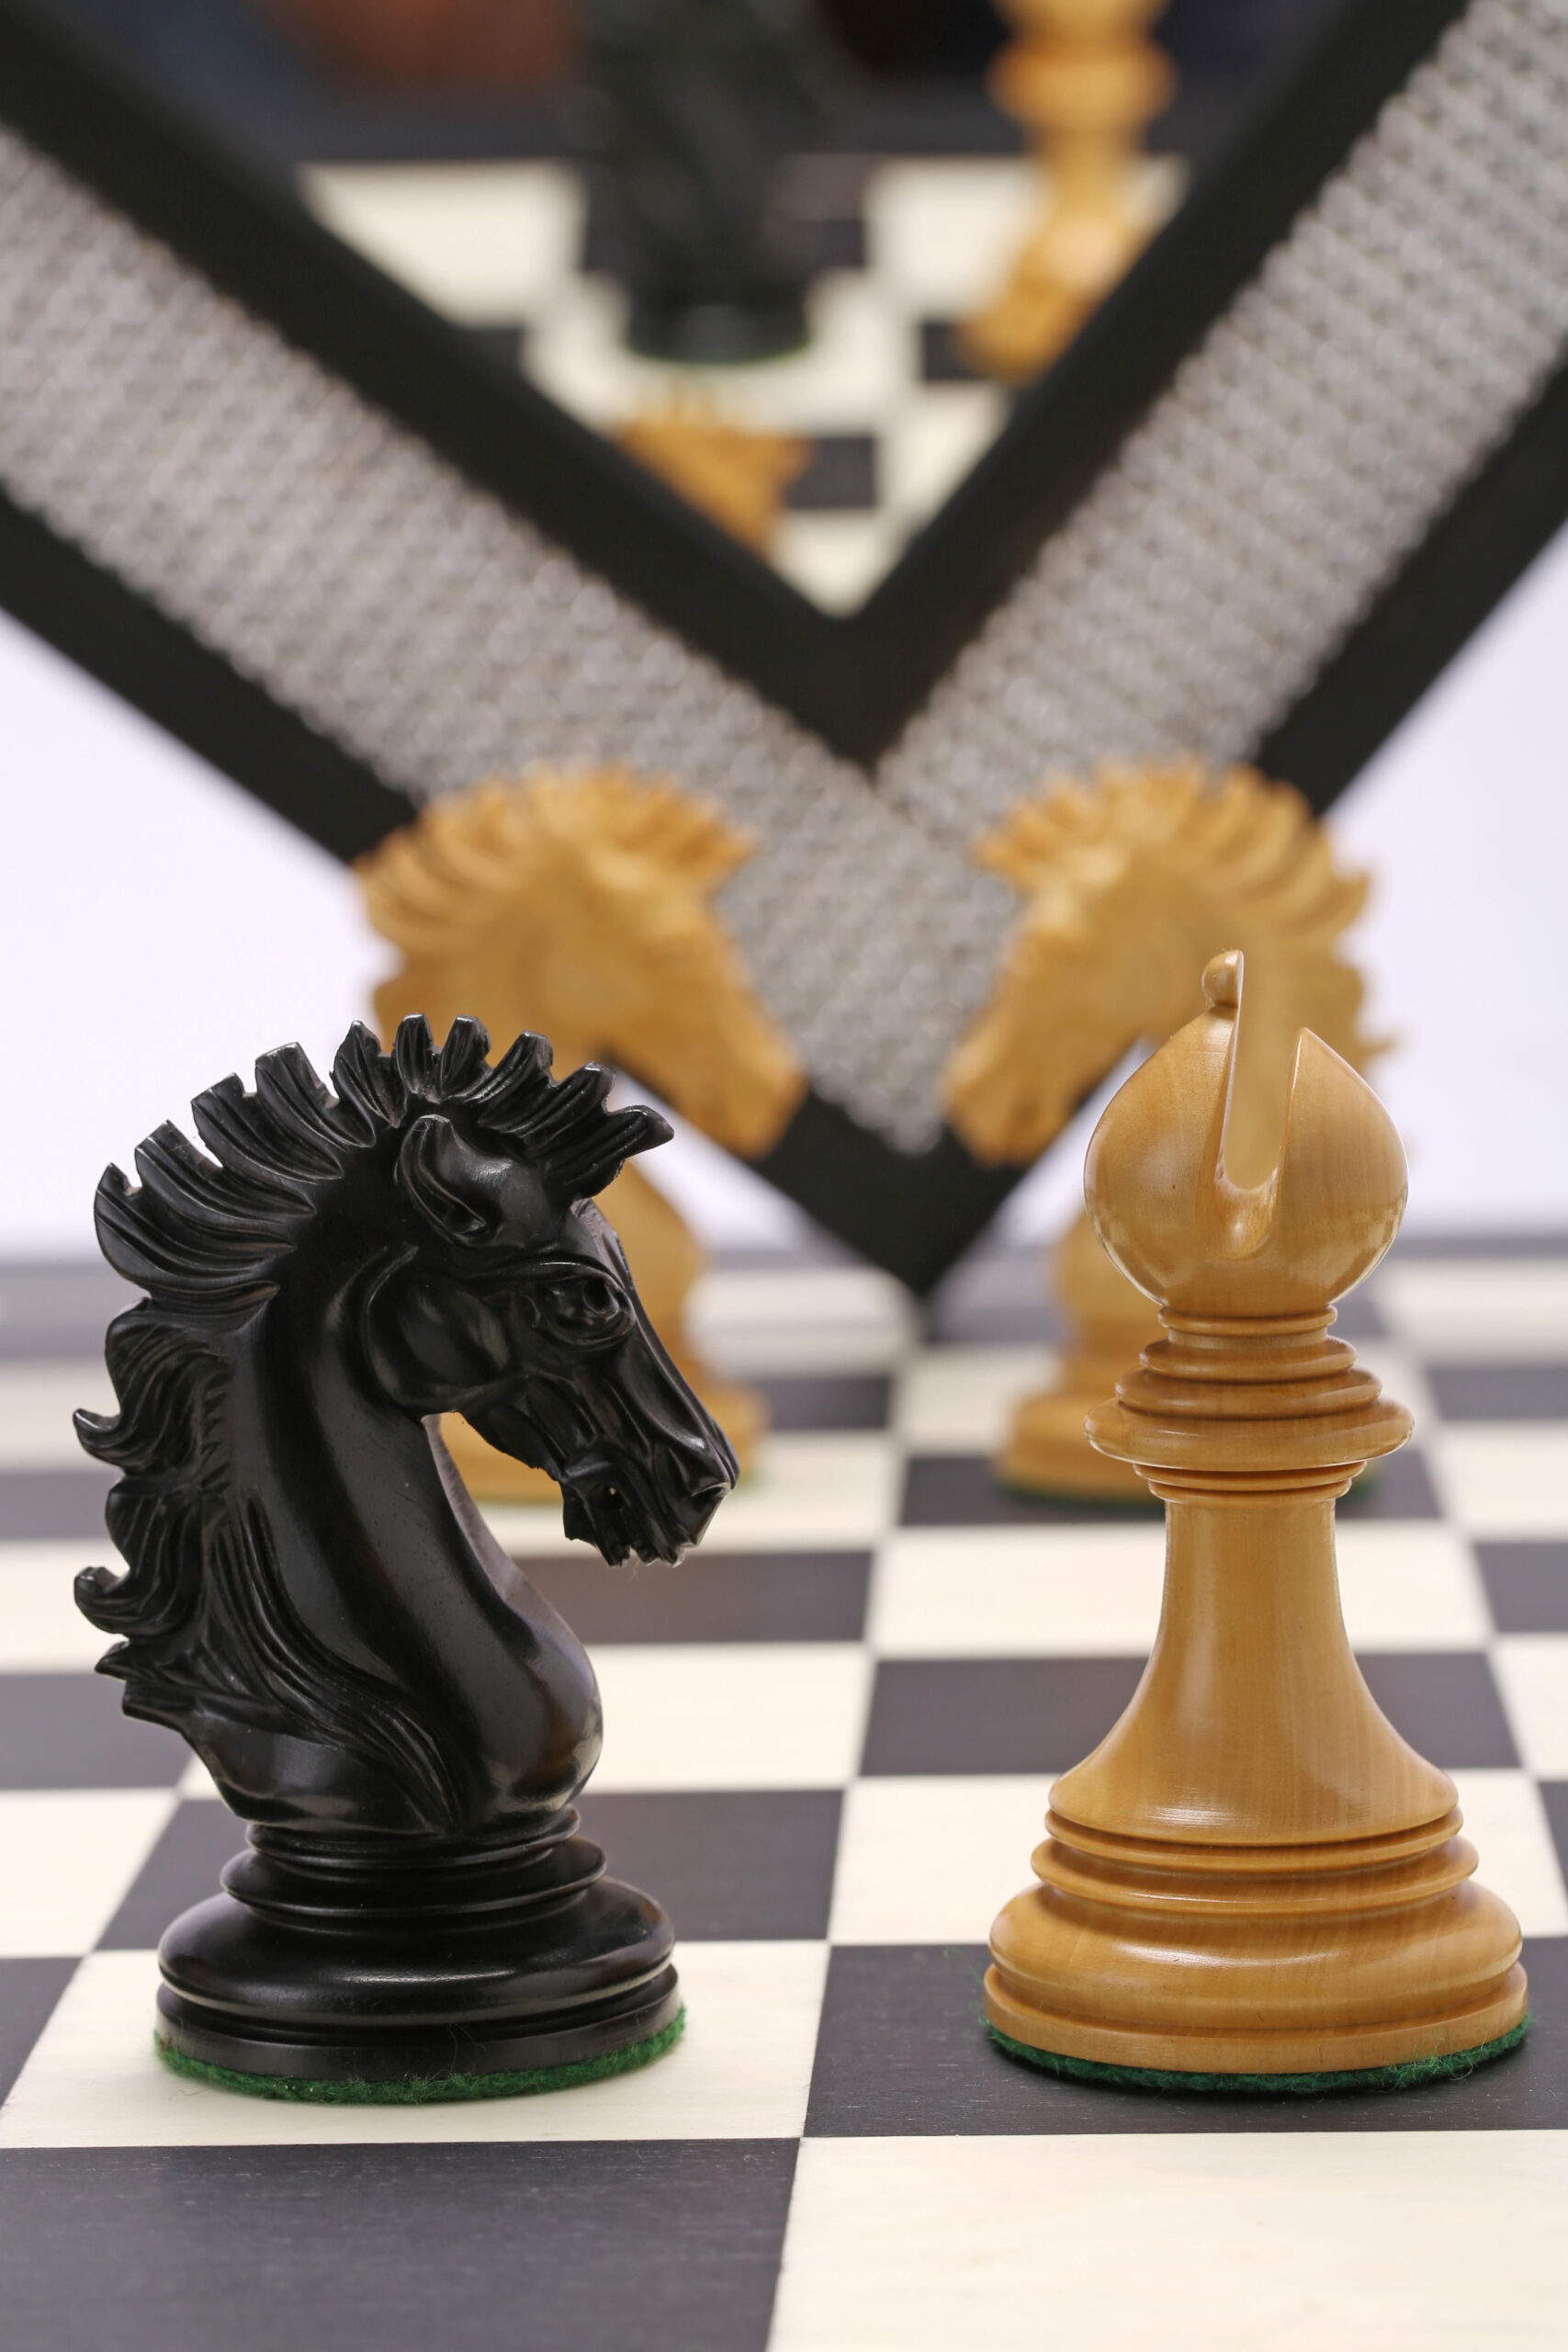 Indianamerican Luxury Series Chess Set? Maybe? Maybe Not? Save Up To Ed4 with Cayman Eco Beyond Cayman In Tanzania Locals And